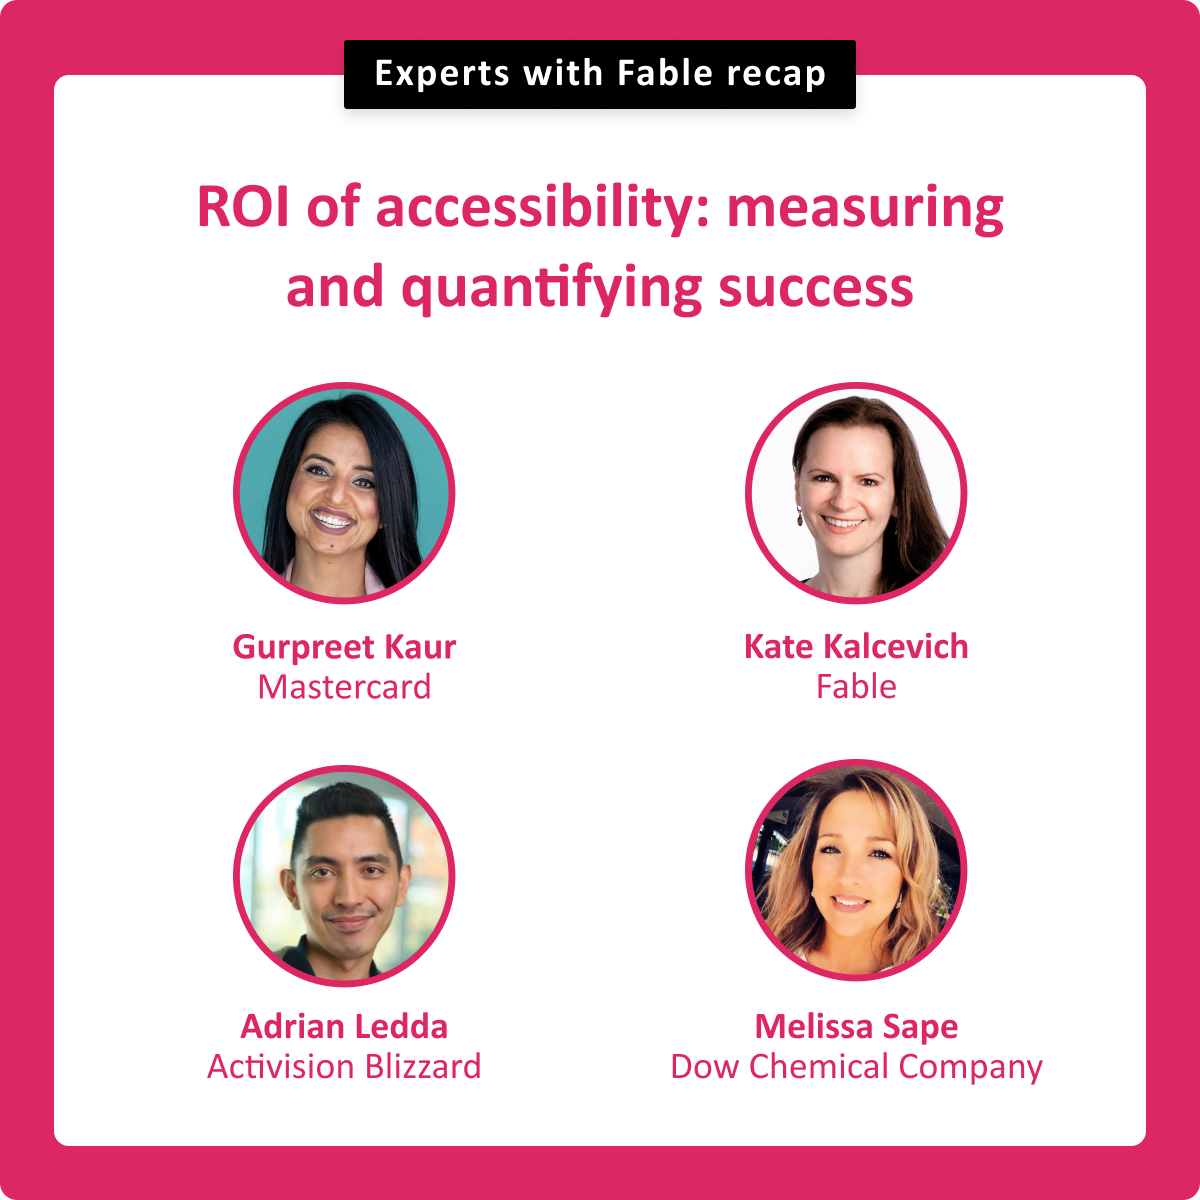 Experts with Fable recap. Gurpreet Kaur, Mastercard. Kate Kalcevich, Fable. Adrian Ledda, Activision Blizzard. Melissa Sape, Dow Chemical Company.